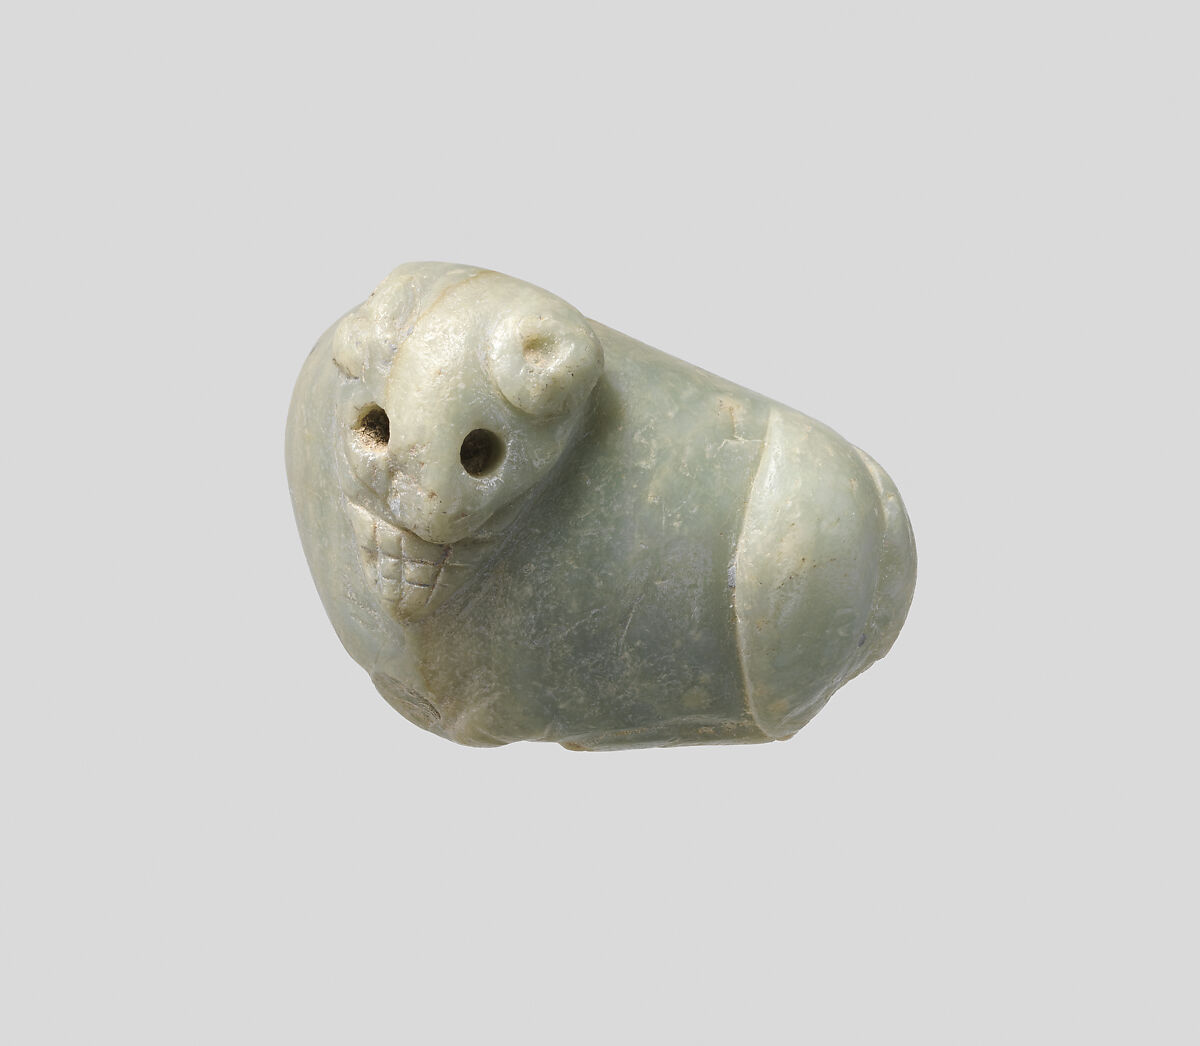 Seal amulet in the form of a reclining cow, Alabaster